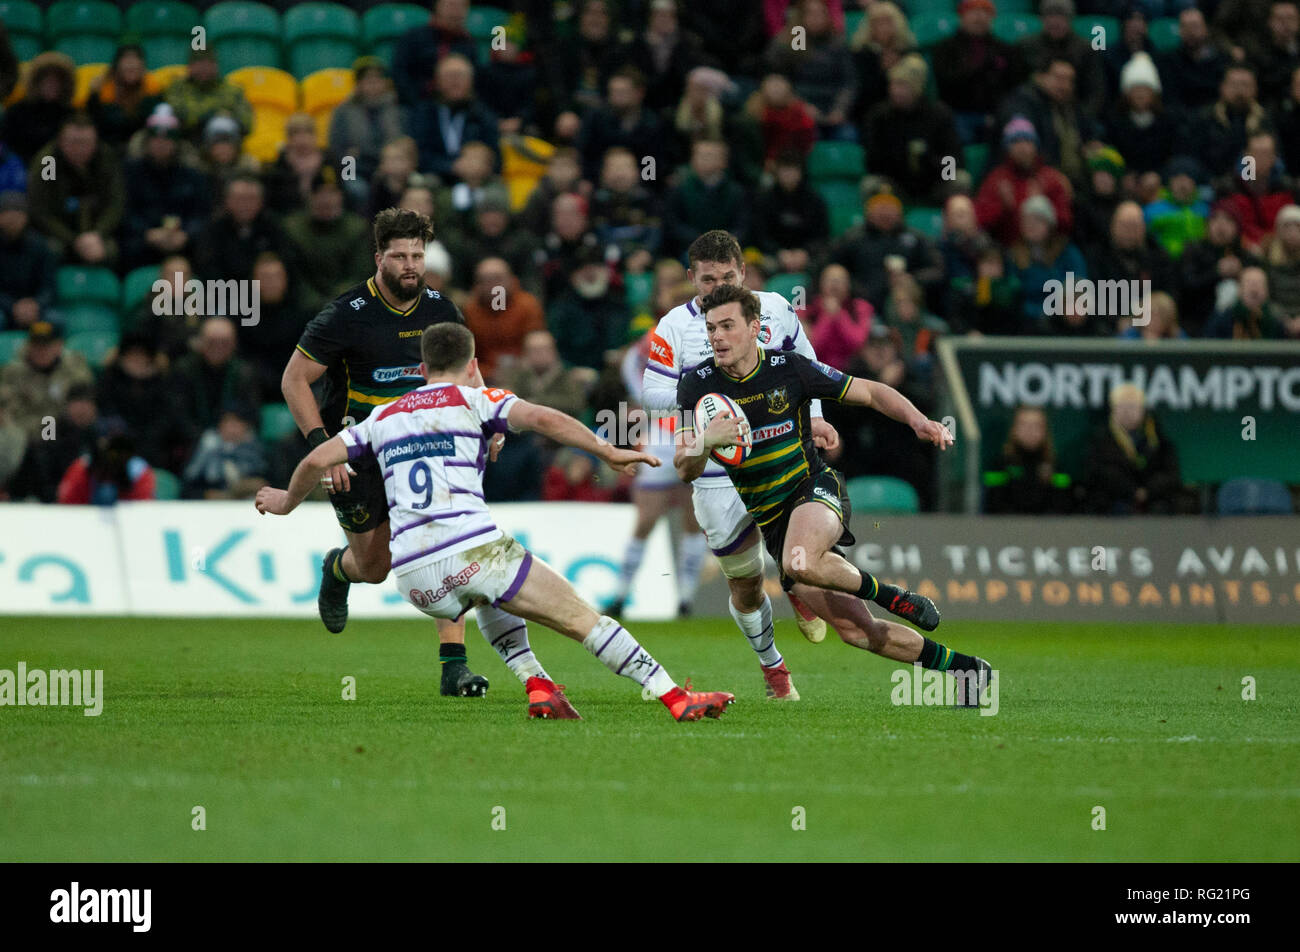 Northampton, UK. 26th January 2019. George Furbank of Northampton Saints runs with the ball during the Premiership Rugby Cup match between Northampton Saints and Leicester Tigers. Andrew Taylor/Alamy Live News Stock Photo